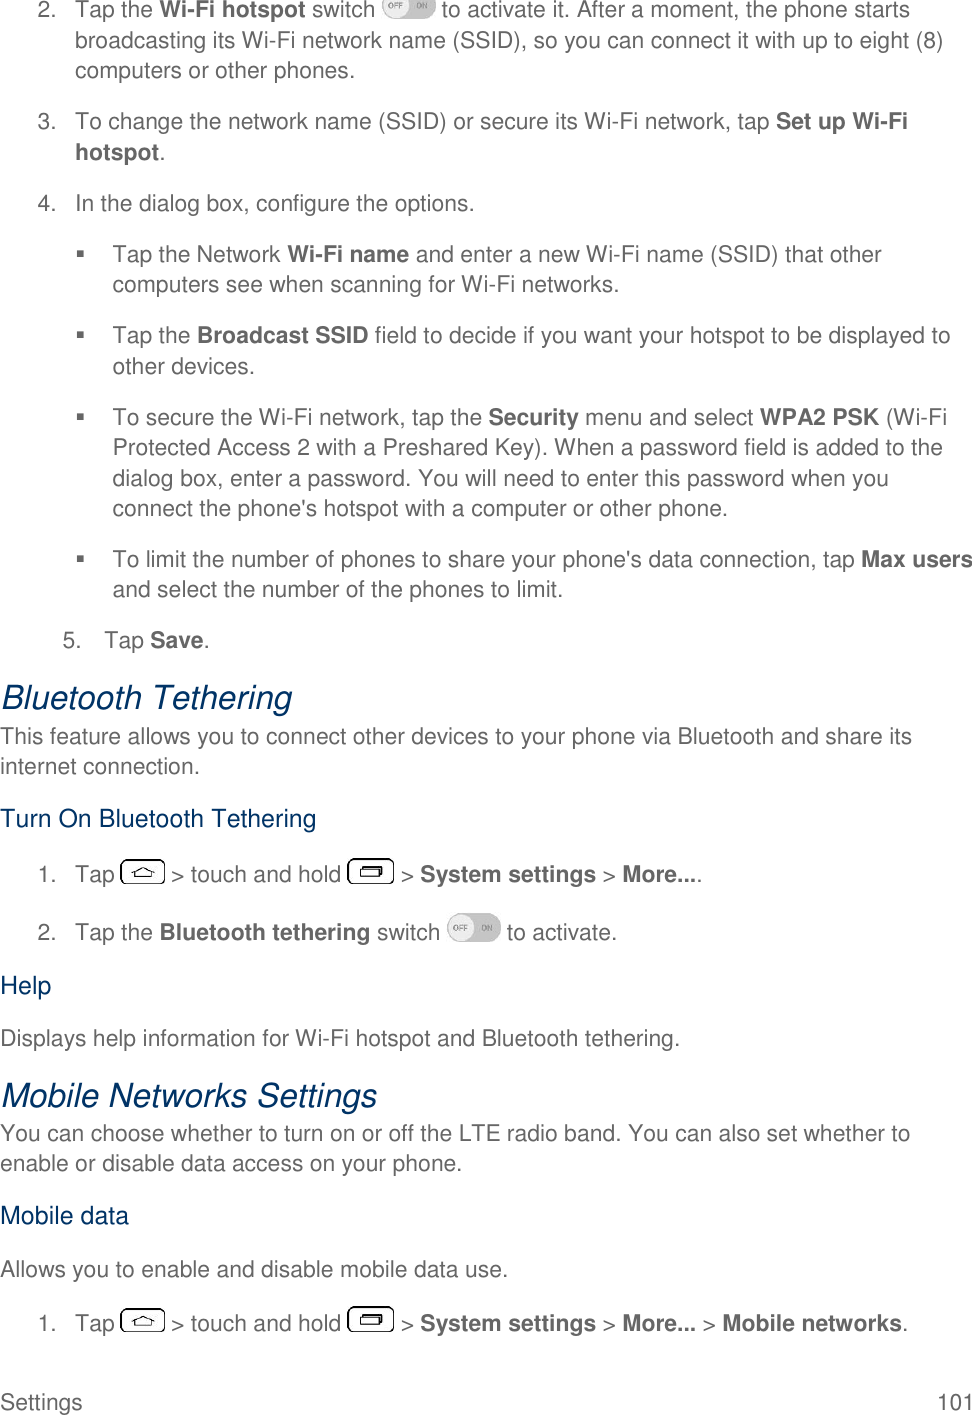  Settings  101 2.  Tap the Wi-Fi hotspot switch   to activate it. After a moment, the phone starts broadcasting its Wi-Fi network name (SSID), so you can connect it with up to eight (8) computers or other phones. 3.  To change the network name (SSID) or secure its Wi-Fi network, tap Set up Wi-Fi hotspot.  4.  In the dialog box, configure the options.    Tap the Network Wi-Fi name and enter a new Wi-Fi name (SSID) that other computers see when scanning for Wi-Fi networks.   Tap the Broadcast SSID field to decide if you want your hotspot to be displayed to other devices.   To secure the Wi-Fi network, tap the Security menu and select WPA2 PSK (Wi-Fi Protected Access 2 with a Preshared Key). When a password field is added to the dialog box, enter a password. You will need to enter this password when you connect the phone&apos;s hotspot with a computer or other phone.   To limit the number of phones to share your phone&apos;s data connection, tap Max users and select the number of the phones to limit.  5.  Tap Save. Bluetooth Tethering This feature allows you to connect other devices to your phone via Bluetooth and share its internet connection. Turn On Bluetooth Tethering 1.  Tap   &gt; touch and hold   &gt; System settings &gt; More.... 2.  Tap the Bluetooth tethering switch   to activate. Help Displays help information for Wi-Fi hotspot and Bluetooth tethering. Mobile Networks Settings You can choose whether to turn on or off the LTE radio band. You can also set whether to enable or disable data access on your phone. Mobile data Allows you to enable and disable mobile data use. 1.  Tap   &gt; touch and hold   &gt; System settings &gt; More... &gt; Mobile networks. 